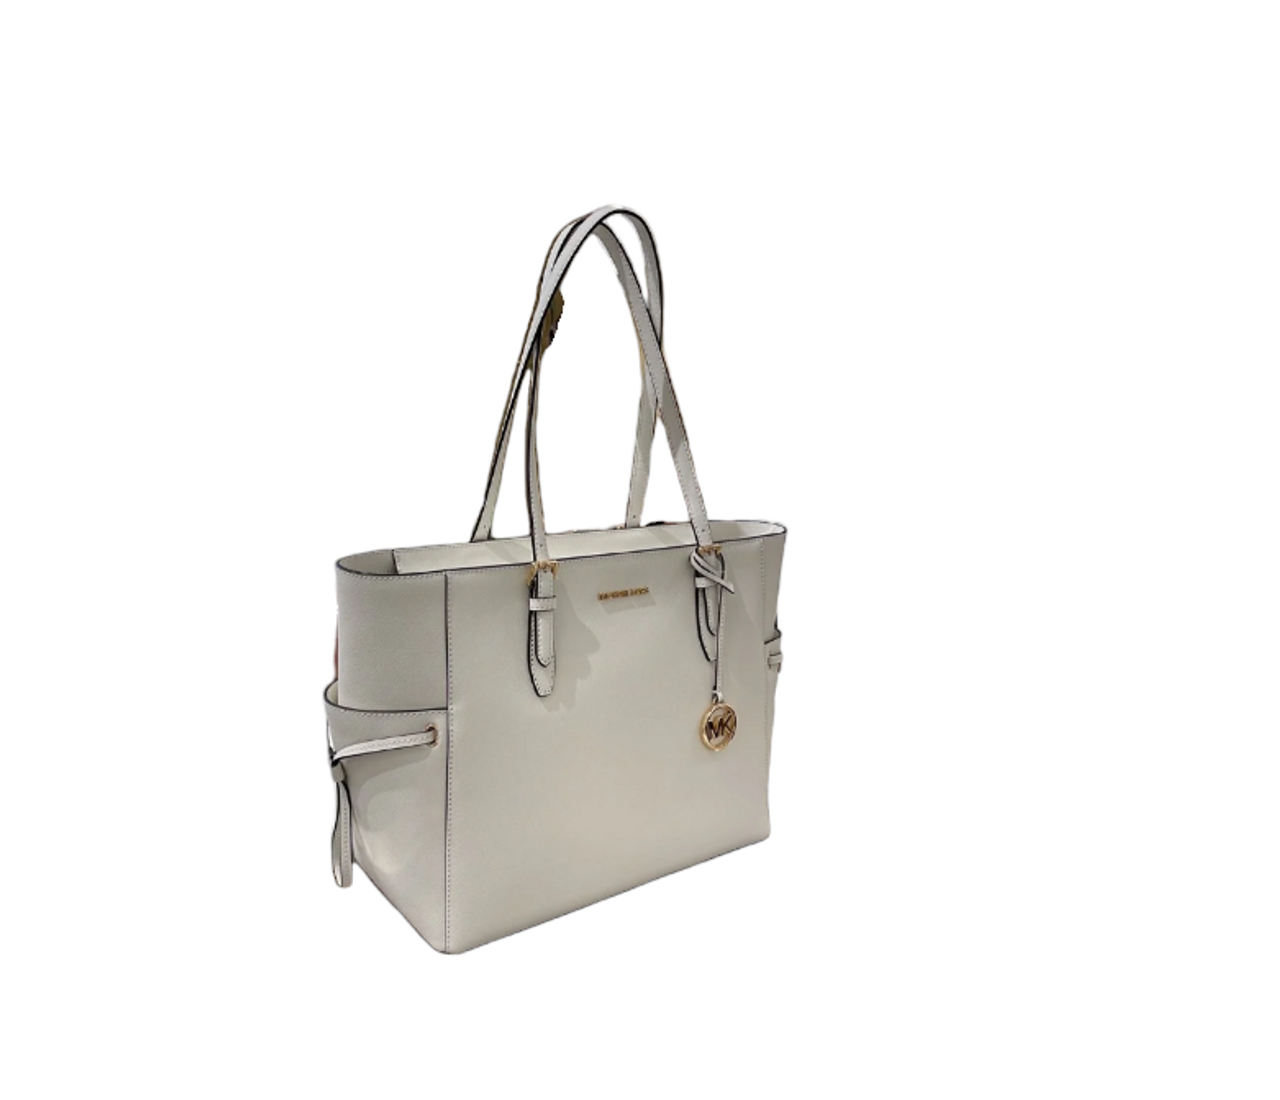 Michael Michael Kors Jet Set Large Saffiano Leather Tote In Optic White